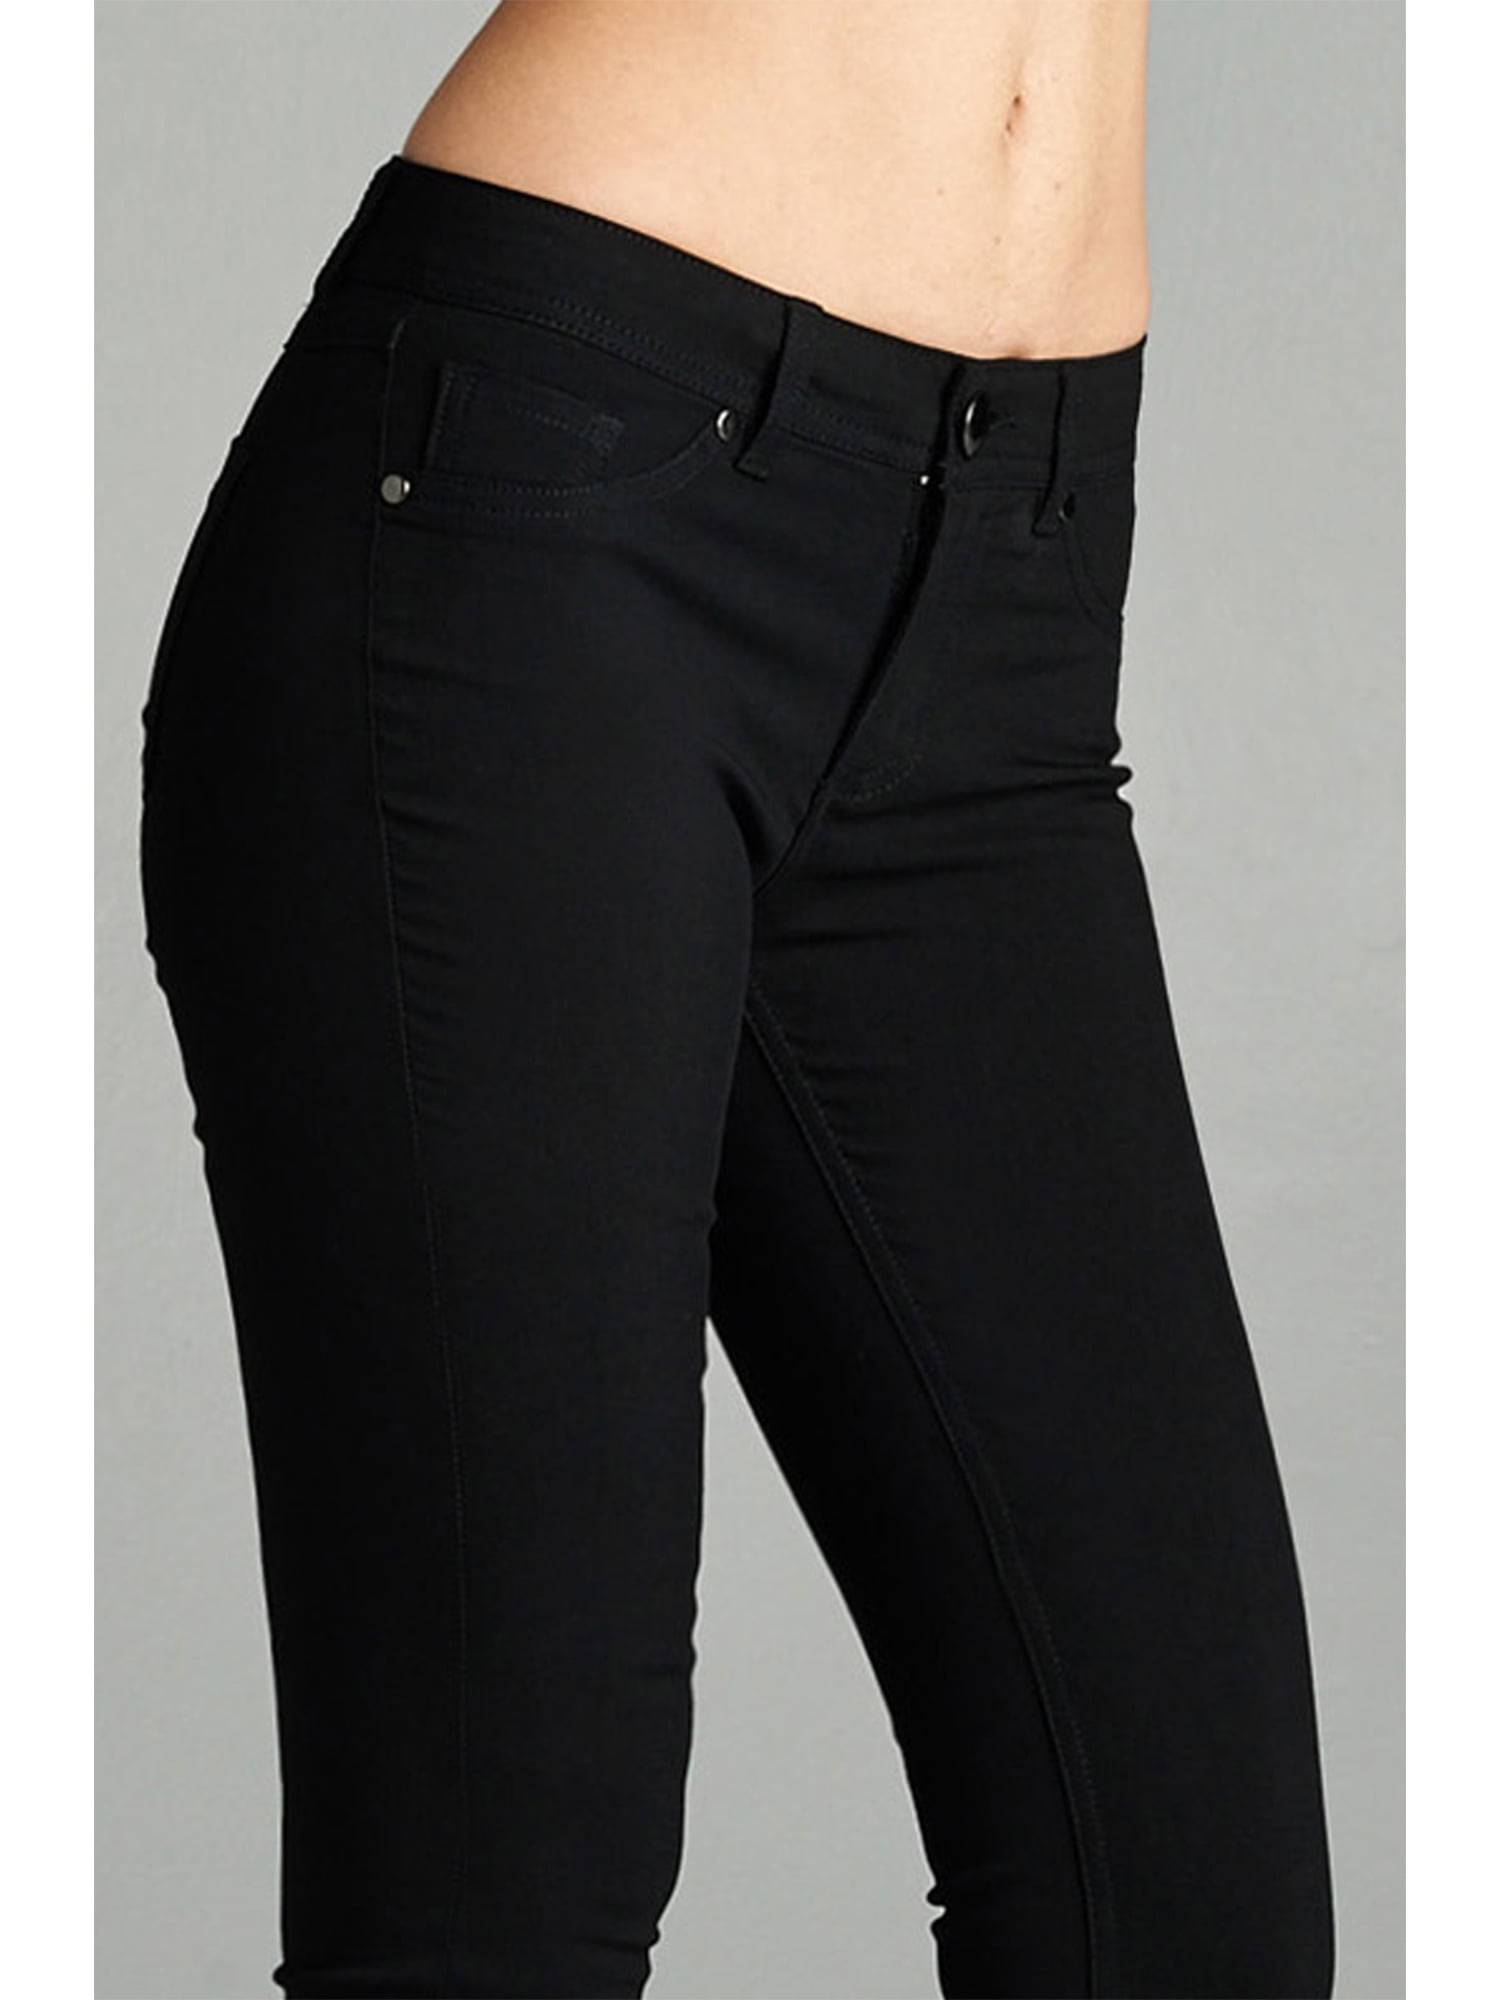 Buy Jeggings for Women/Girls Stretchable Formals/Casual Check Lycra Checks  Free Size Waist 26-30 Black at